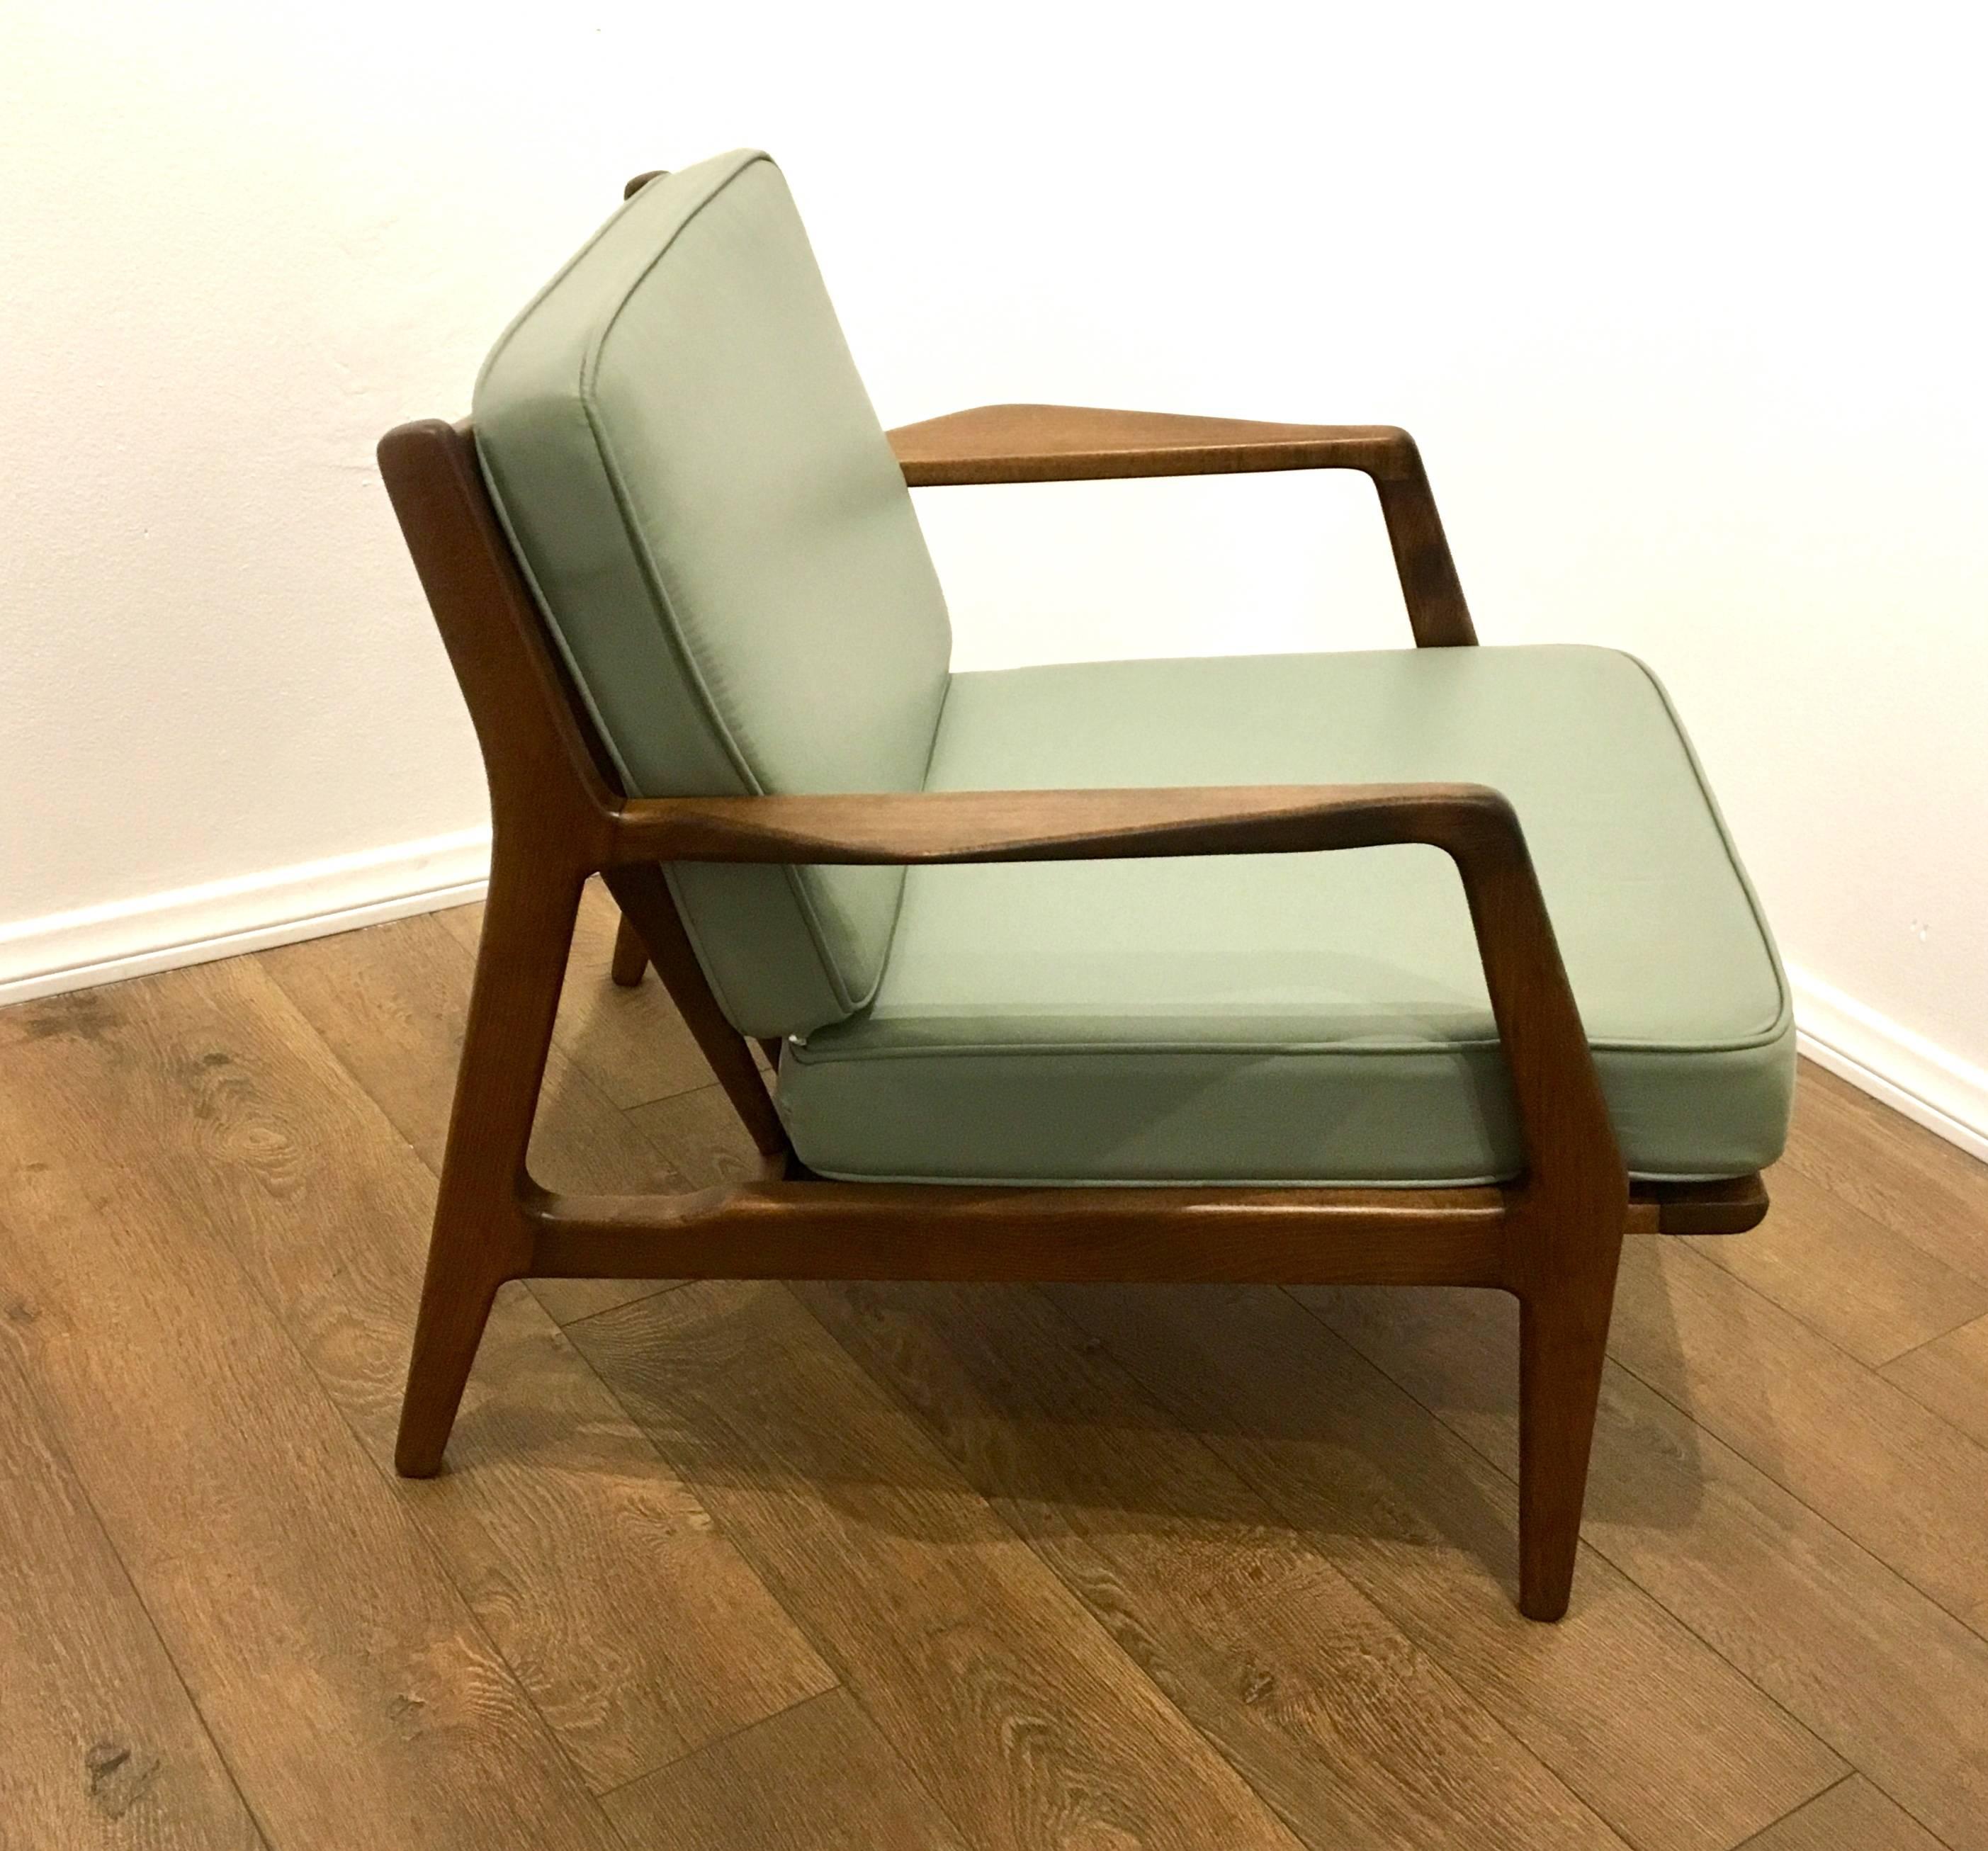 Nice lines on this great lounge armchair designed by Kofod Larsen, circa 1950s freshly recover in sea foam Naugahyde cushions. Solid and sturdy in its original walnut finish.